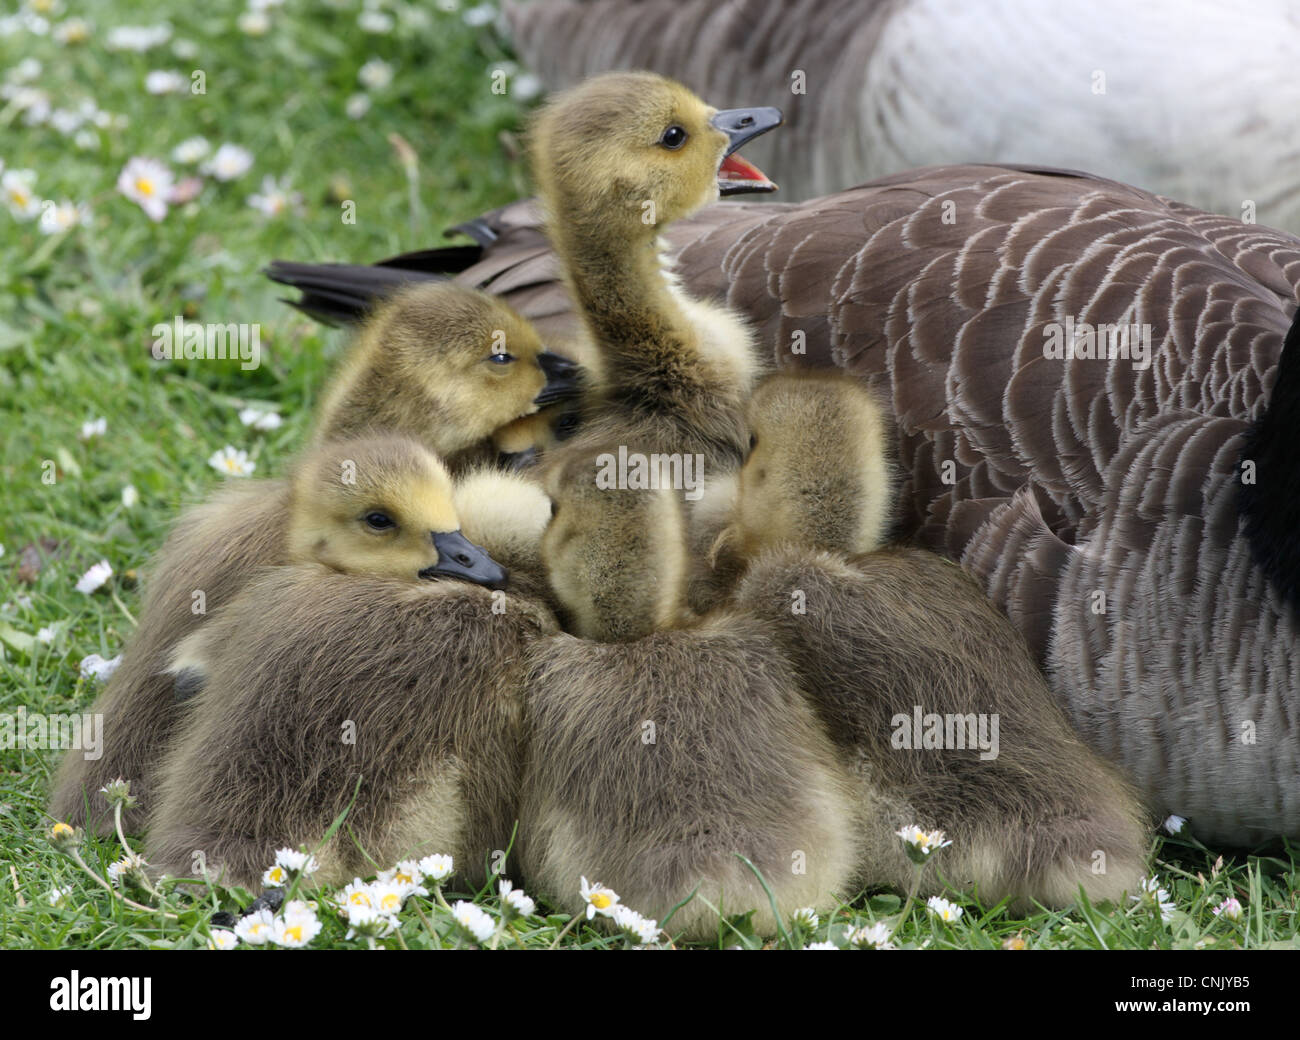 Canada Goose (Branta canadensis) introduced species, goslings, huddled together beside parent, London, England, may Stock Photo